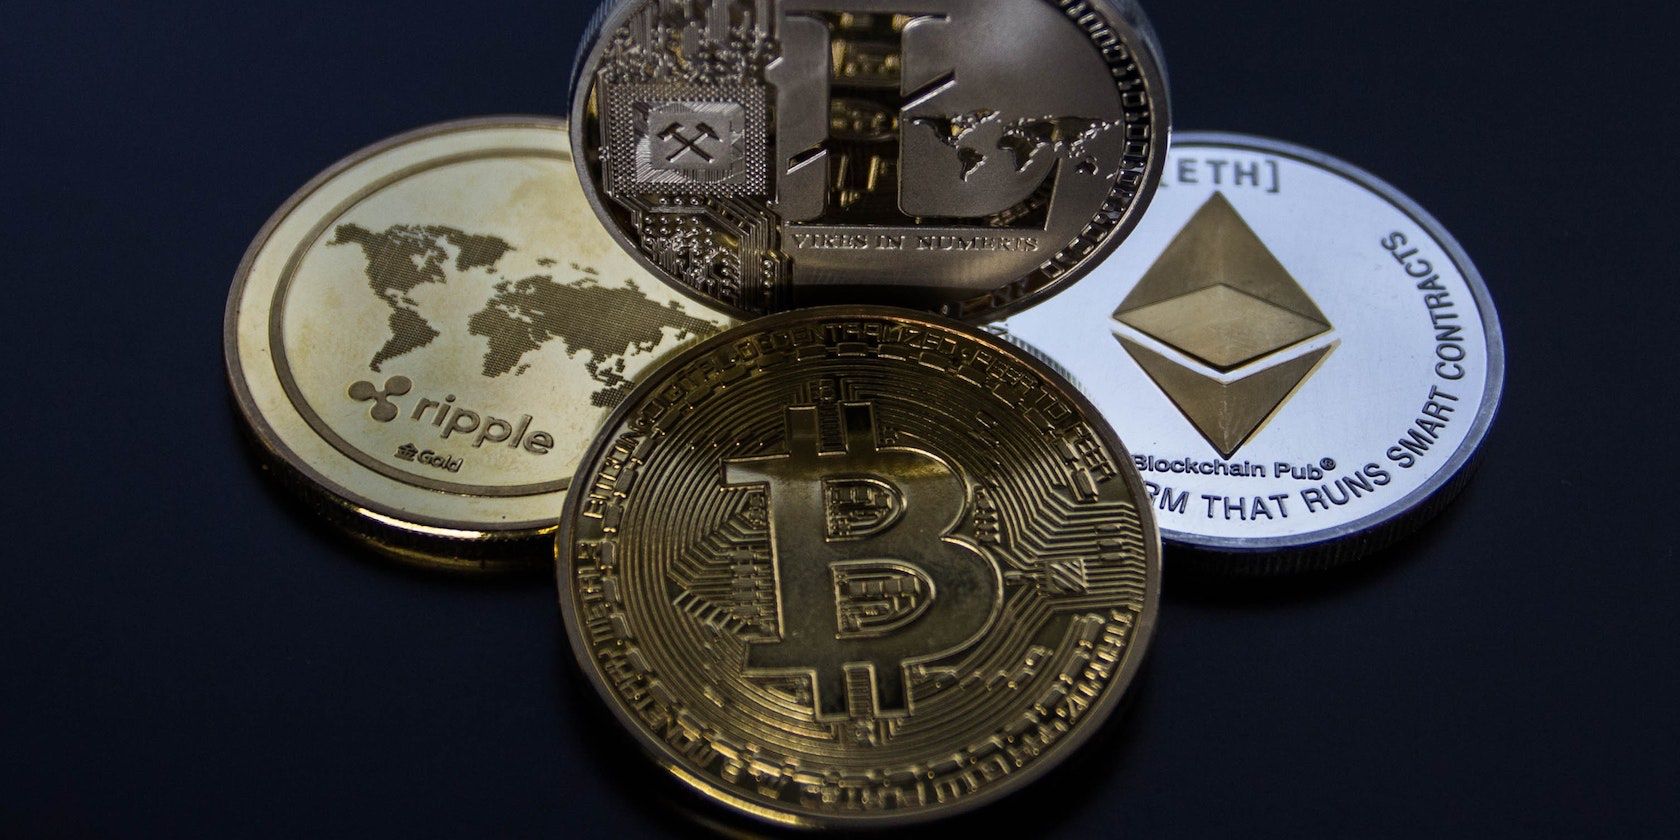 An image showing BTC, XRP, ETH and LTC tokens